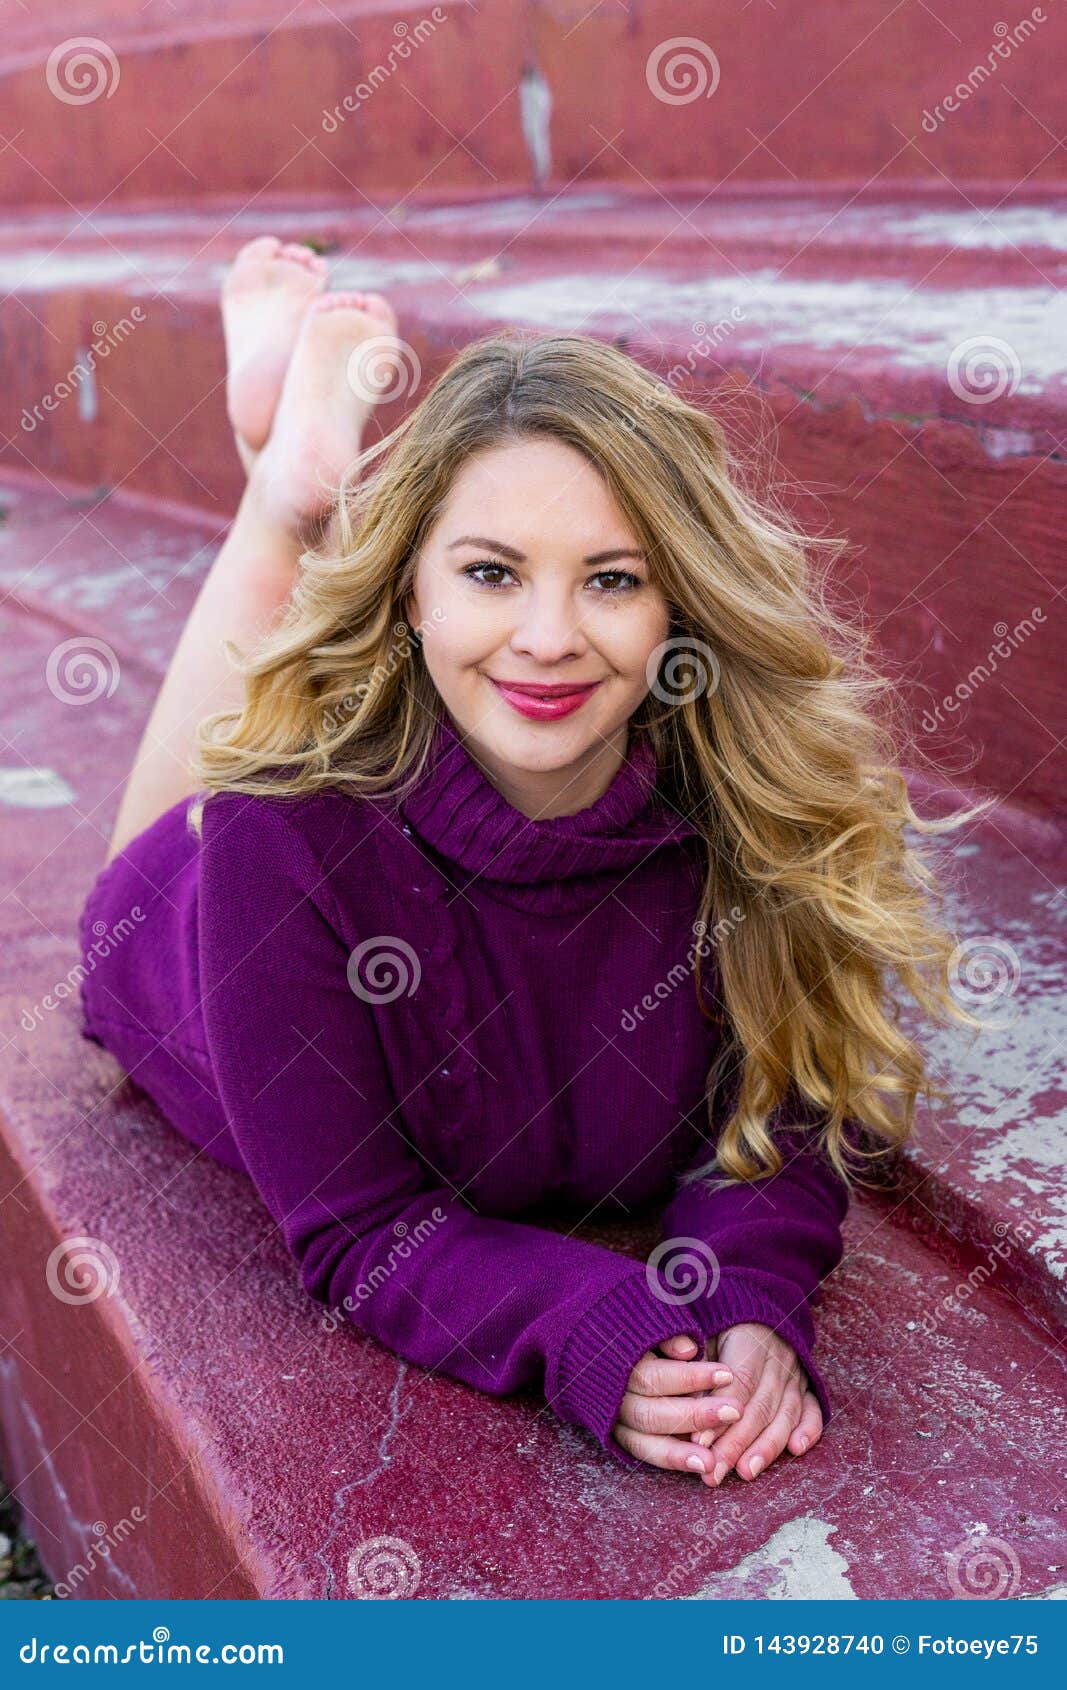 Pretty Girl White Latino With Long Blonde Hair Stock Photo Image